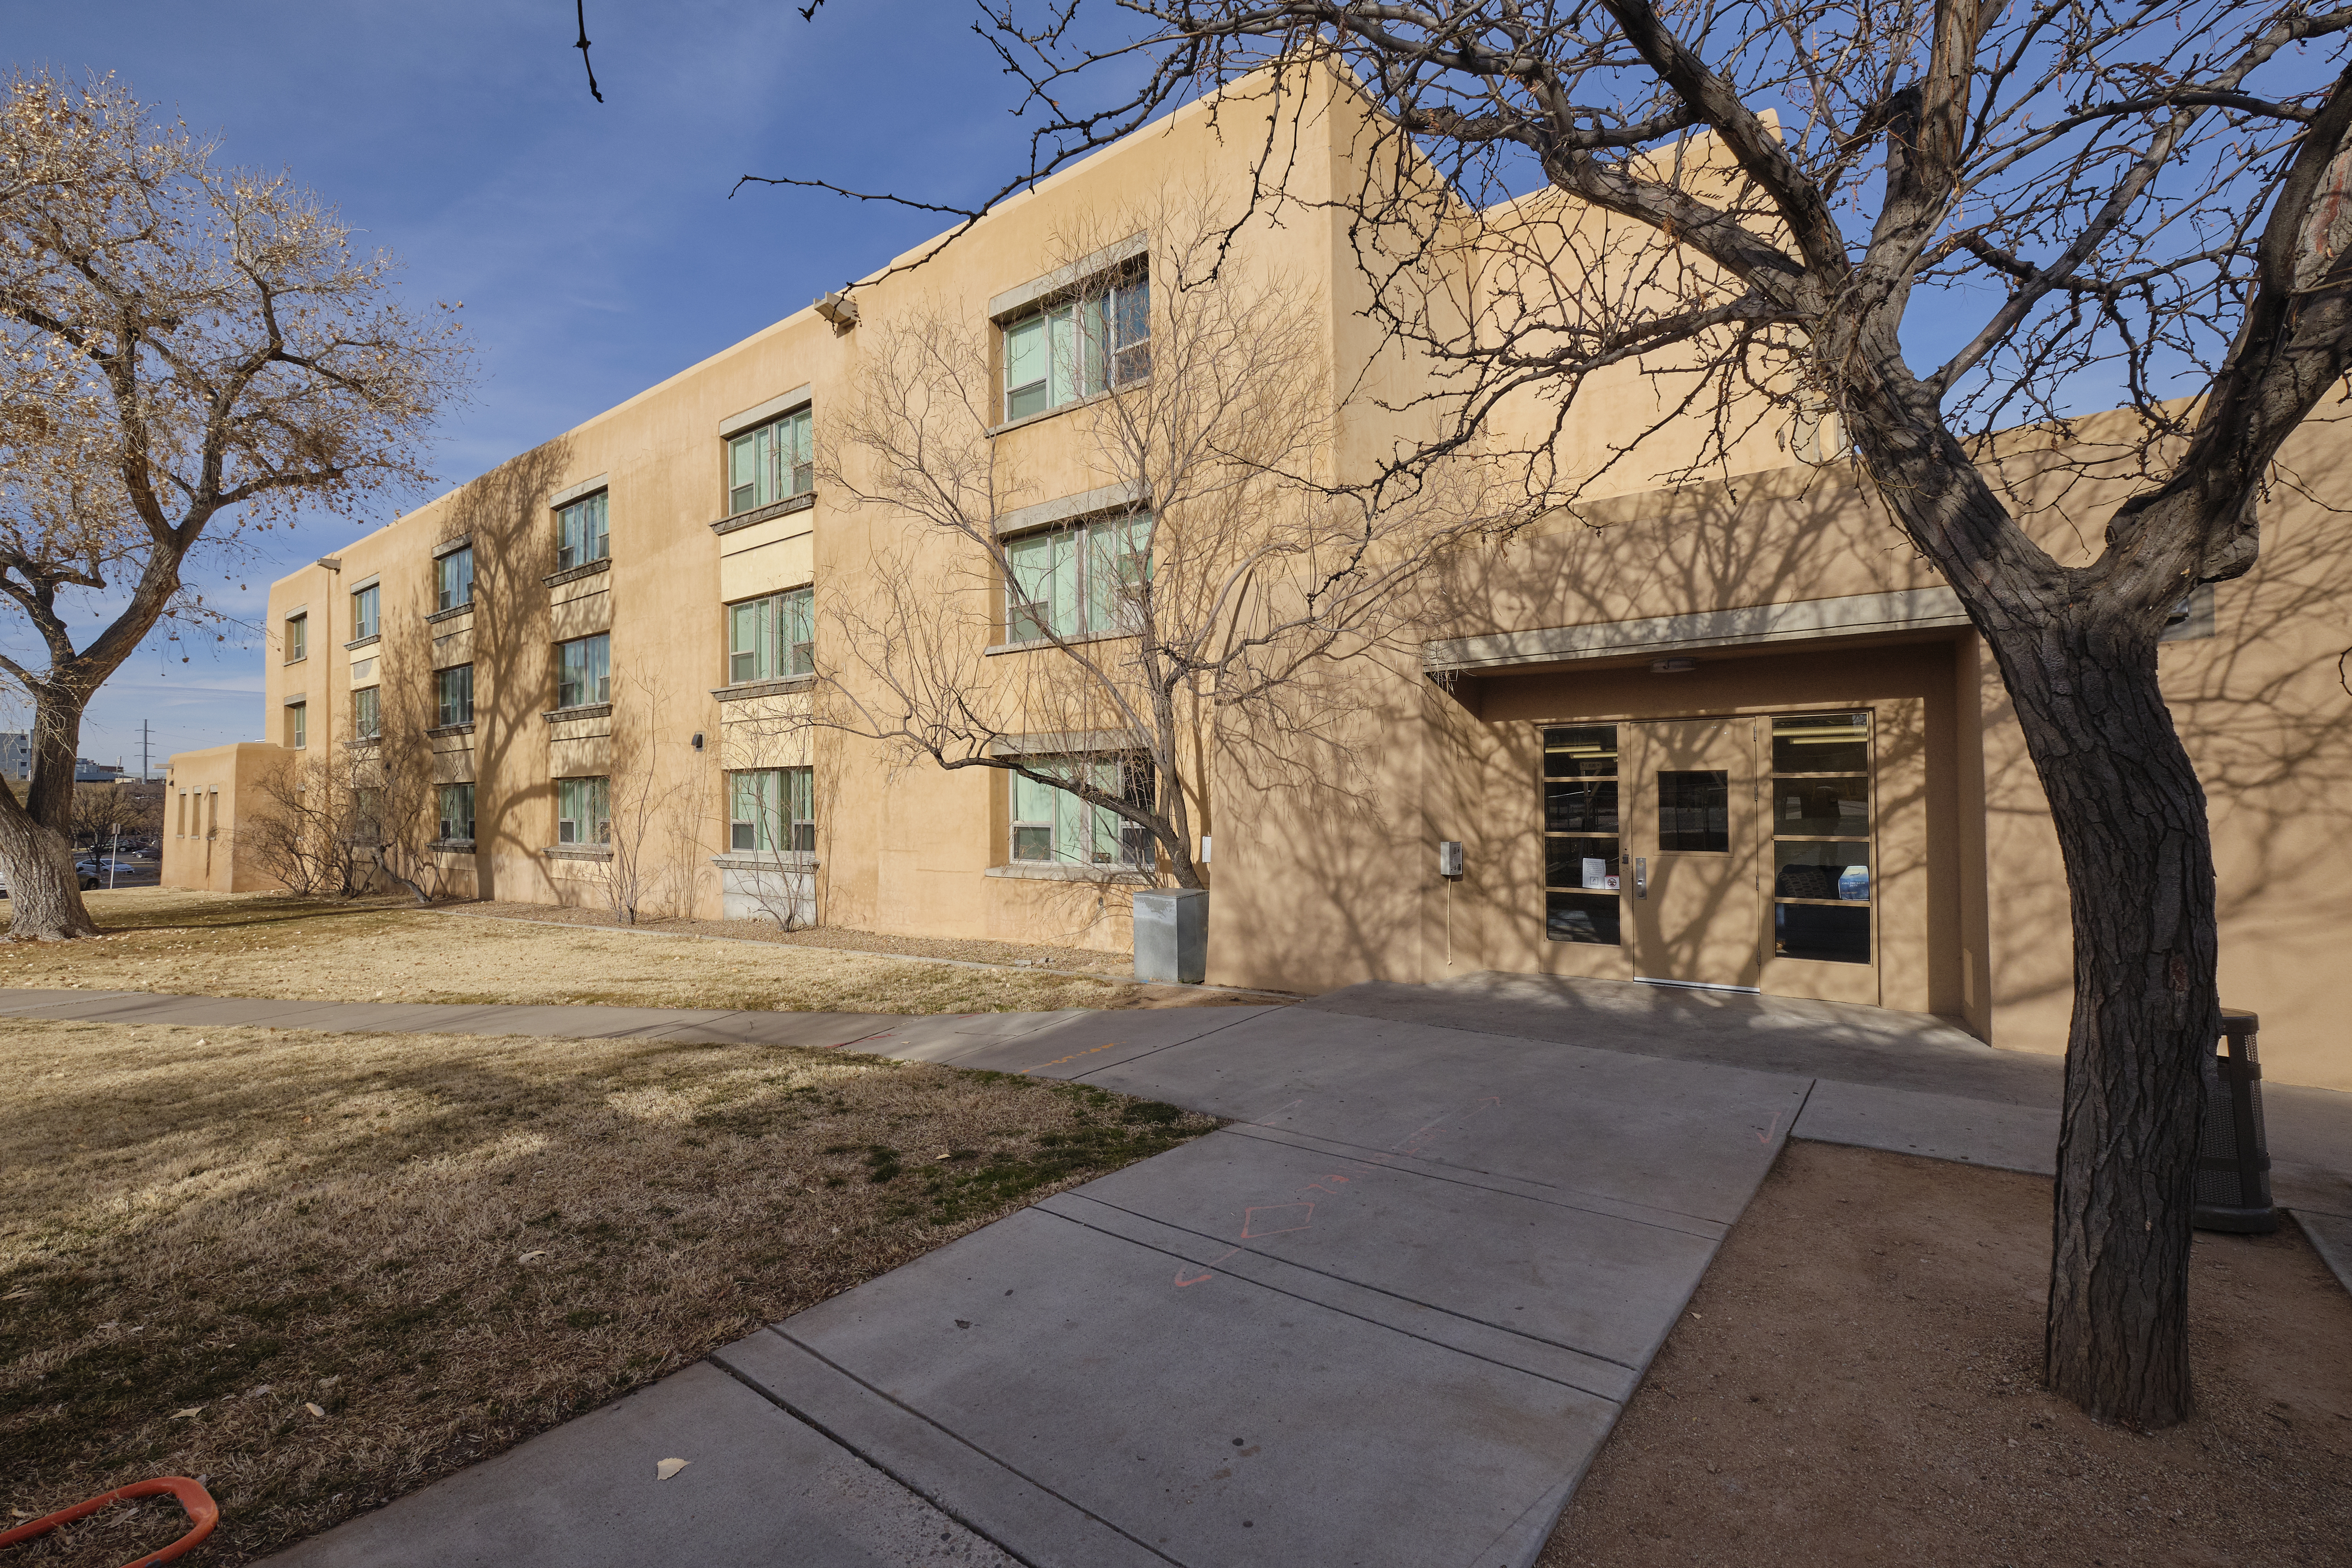 Experience Nuclear Engineering photos of housing and dining facilities